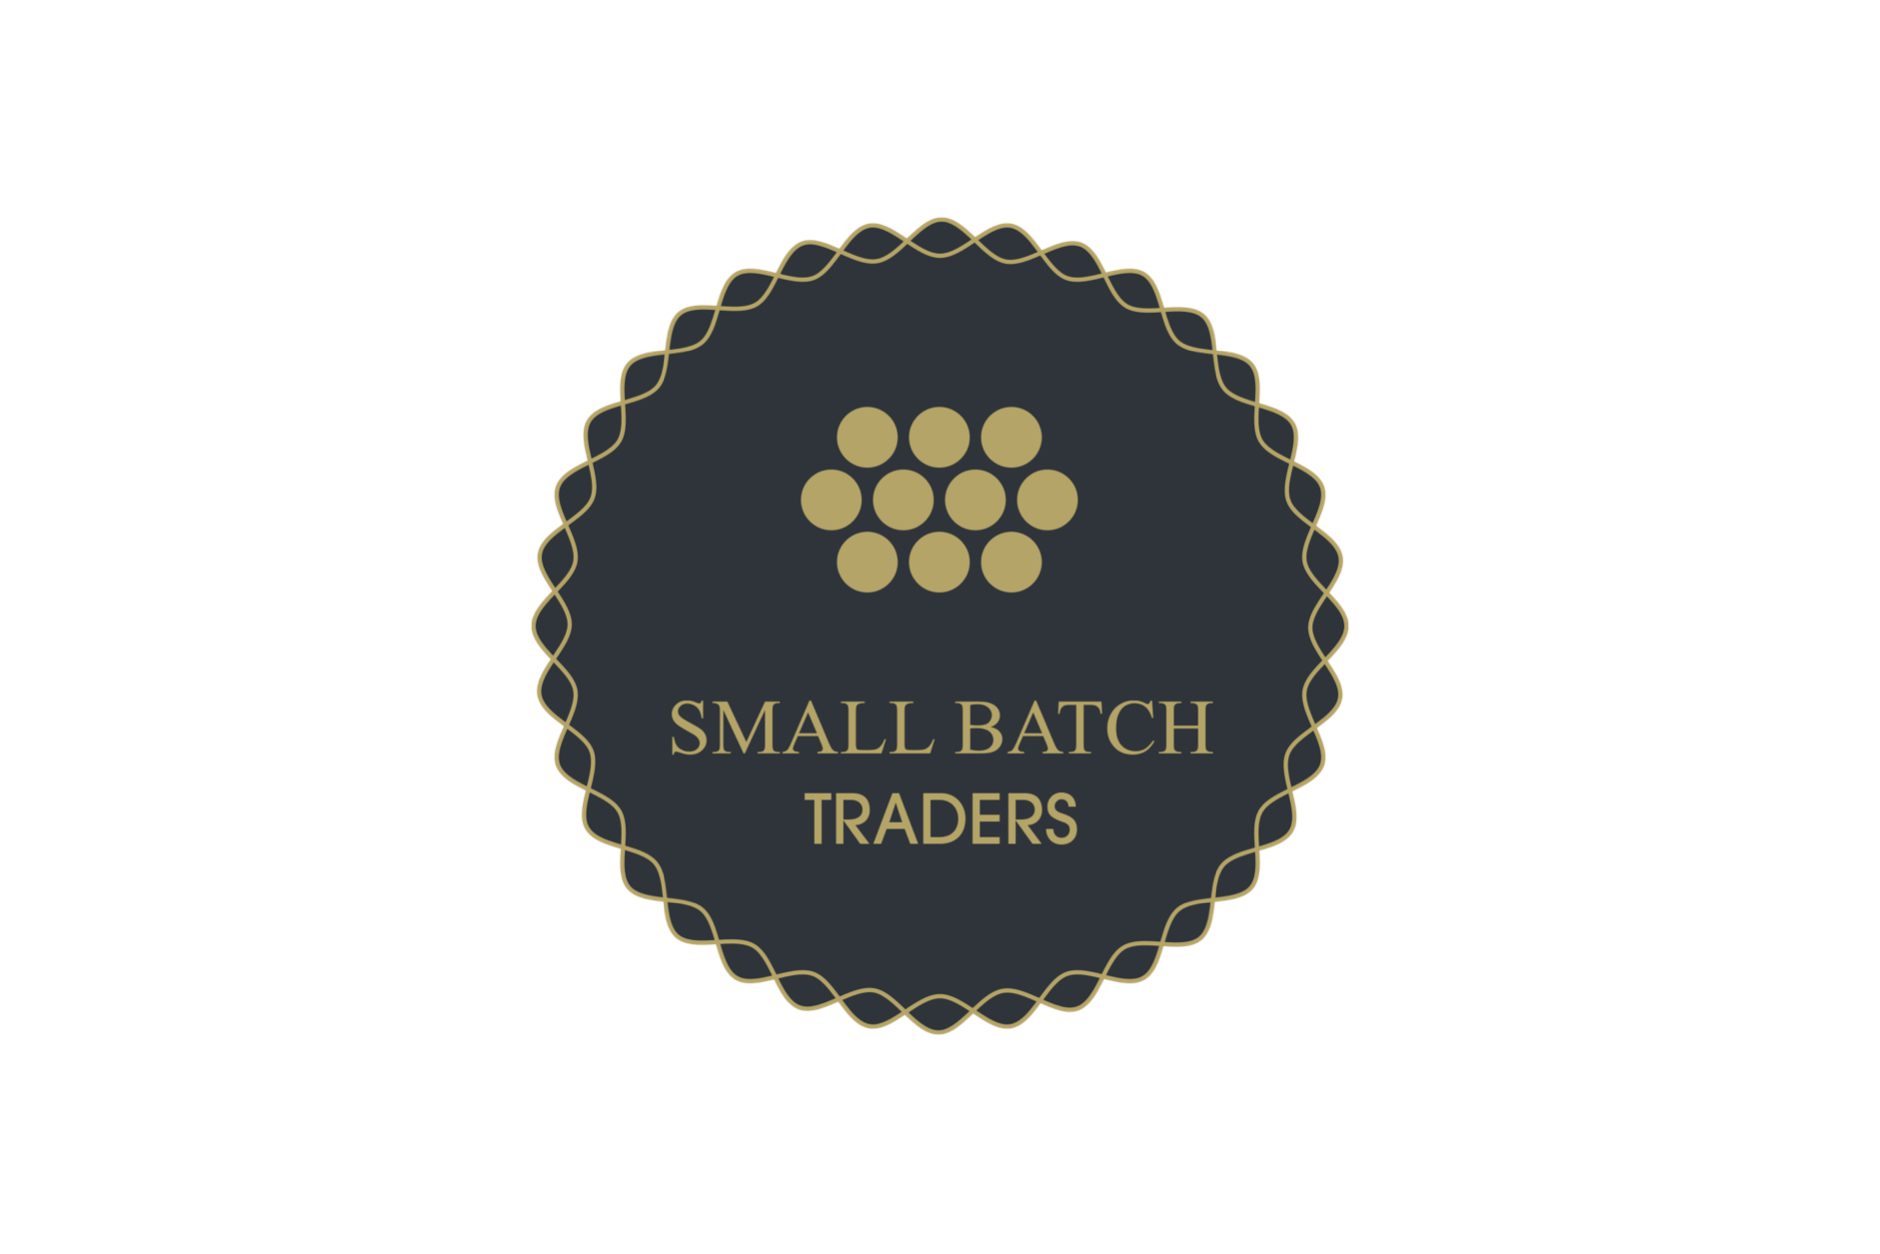 henry-ter-haar-joins-small-batch-traders